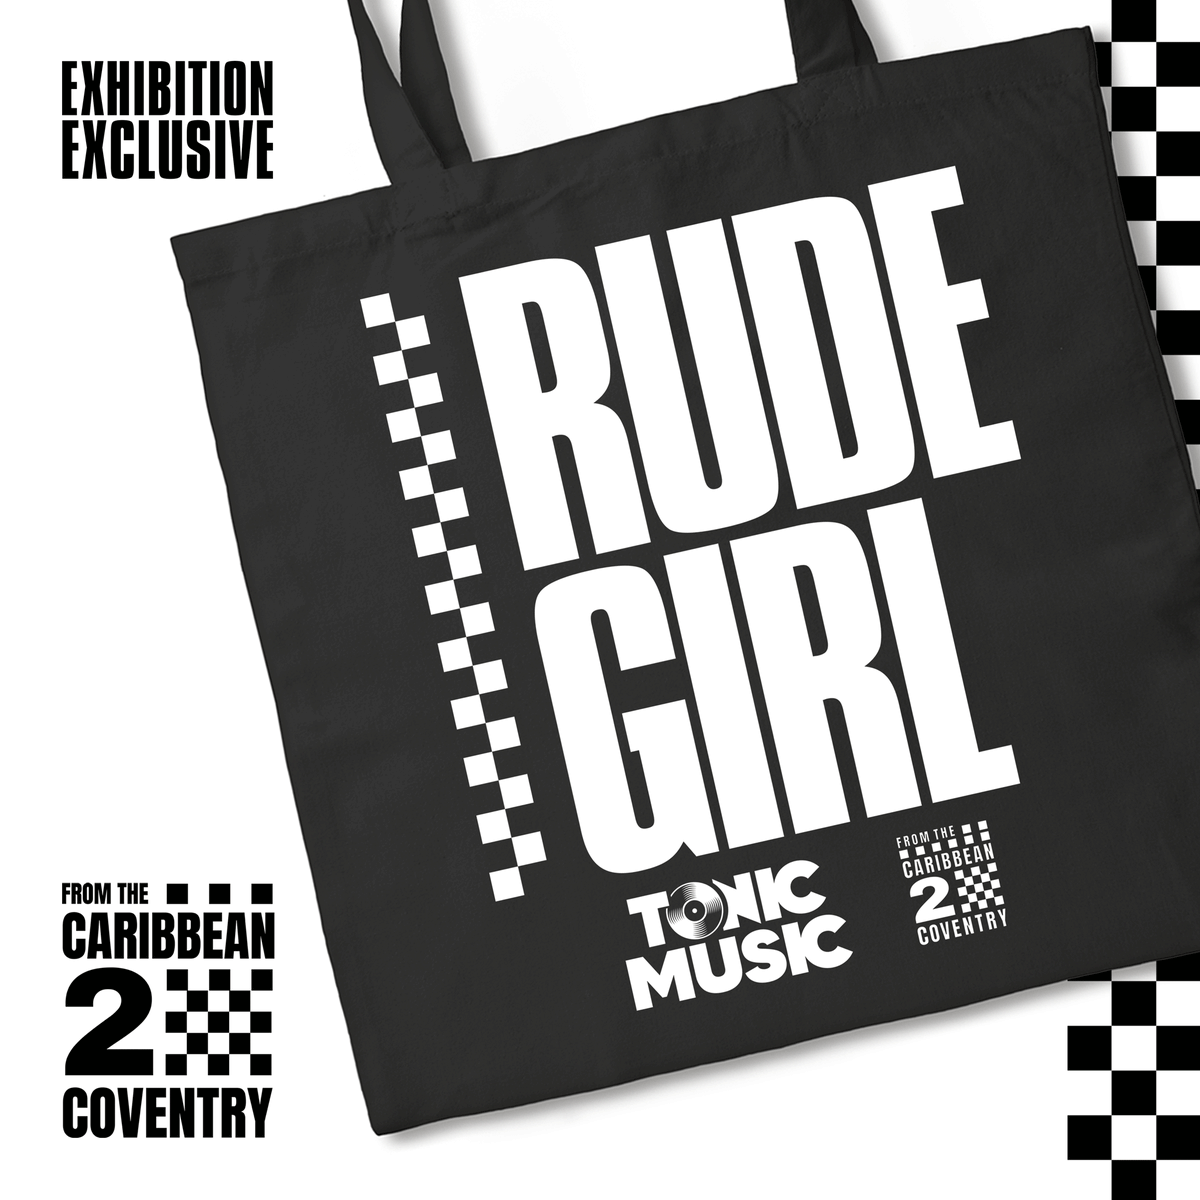 When heading to the amazing @FromTheCar2Cov exhibition at the Barbican, be sure to purchase a limited edition Tote Bag - all proceeds go towards helping fund training and support for people experiencing poor mental health. #MentalHealth #Music #Tonic #2Tone